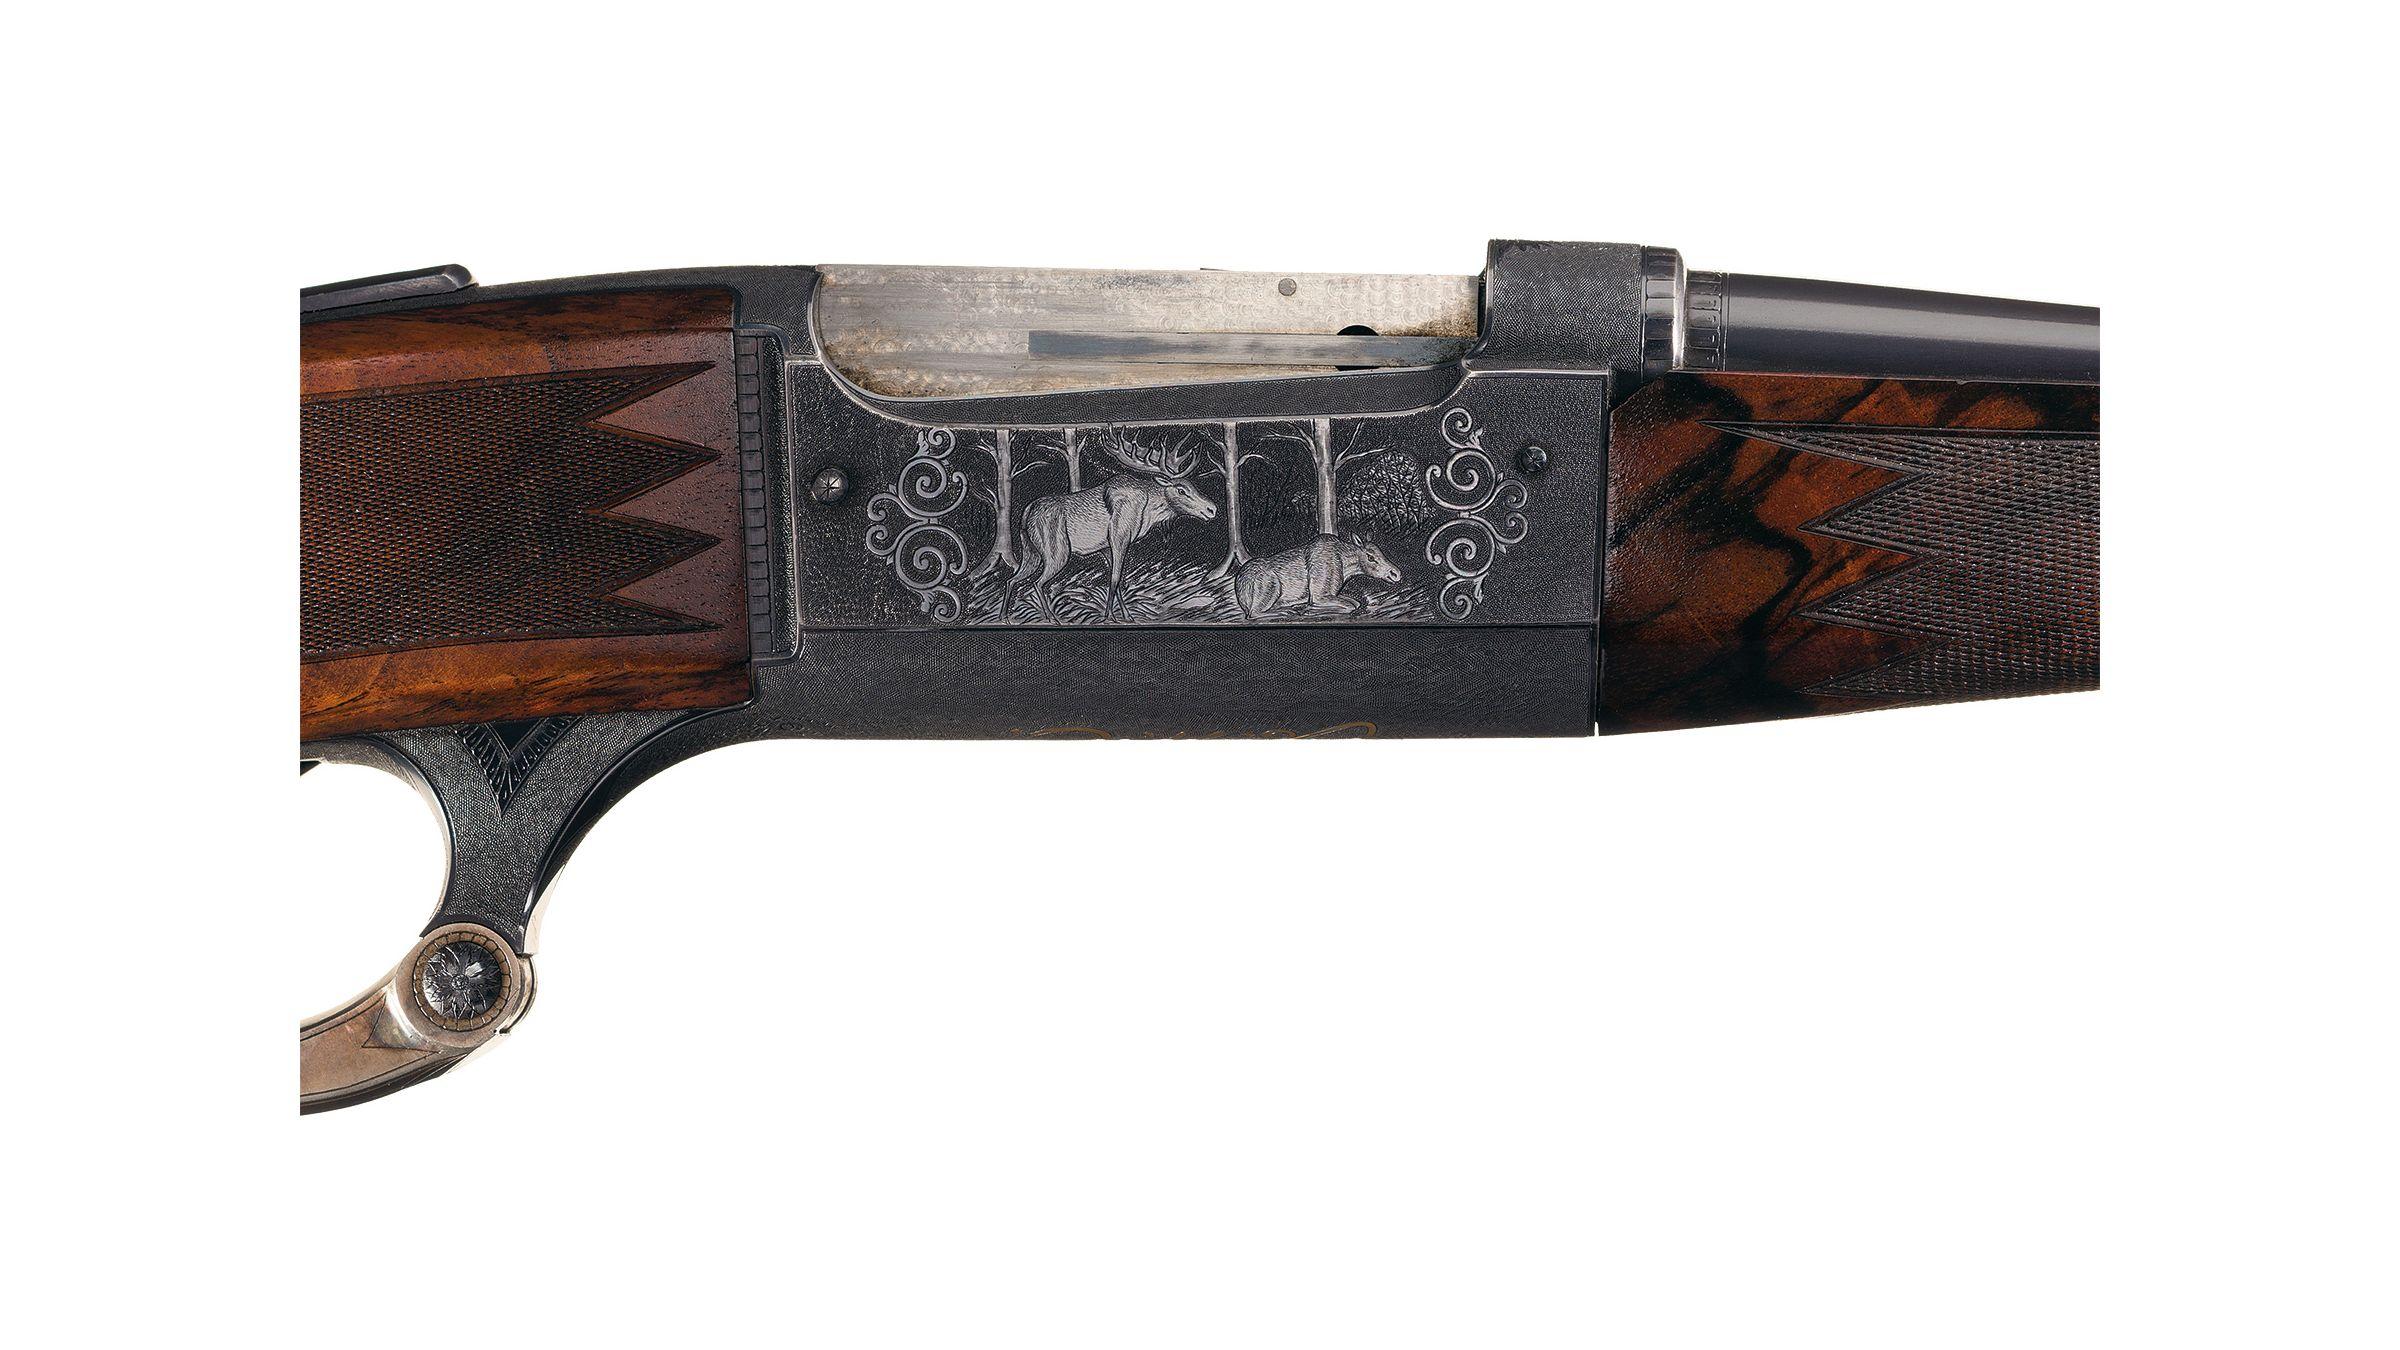 Factory Engraved/Inlaid Savage Model 1899 Featherweight Rifle